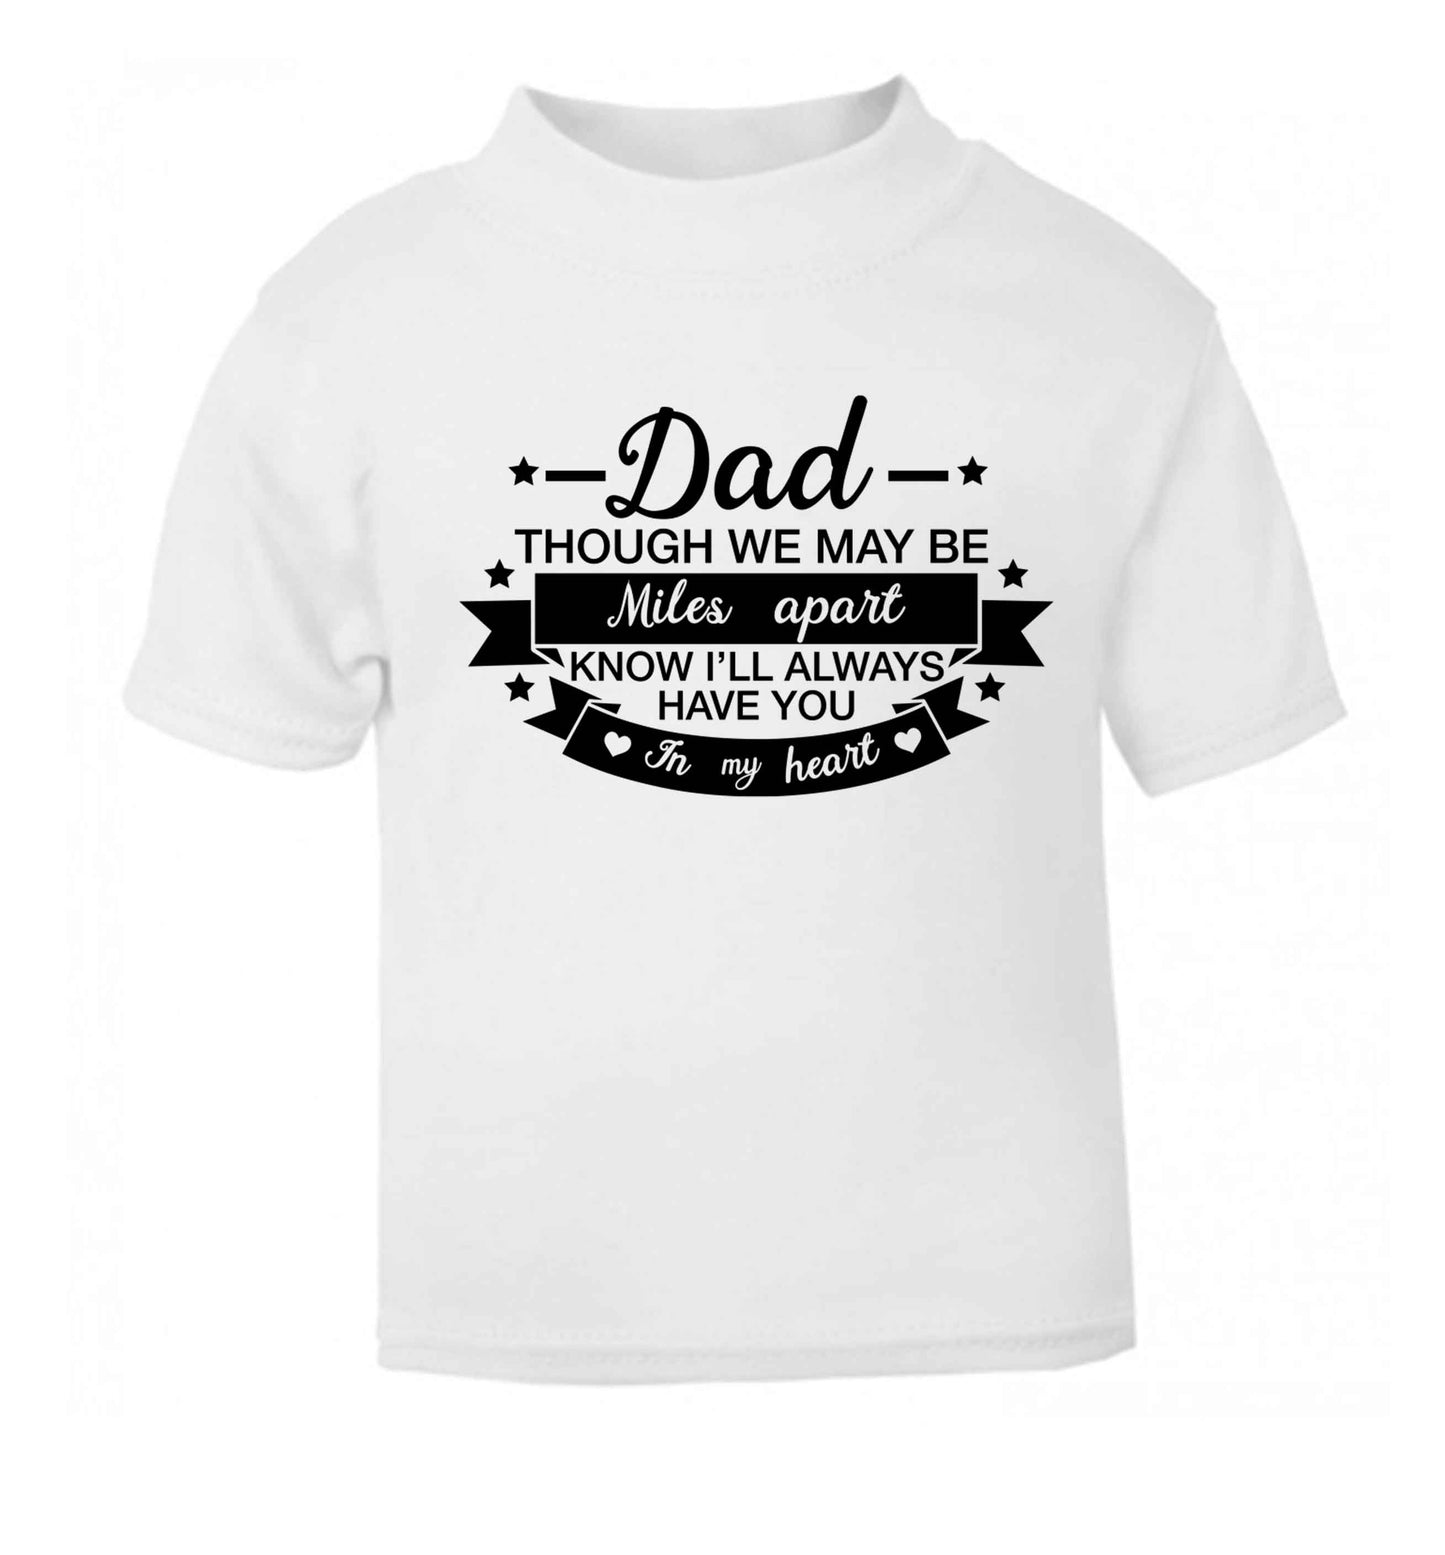 Dad though we are miles apart know I'll always have you in my heart white baby toddler Tshirt 2 Years